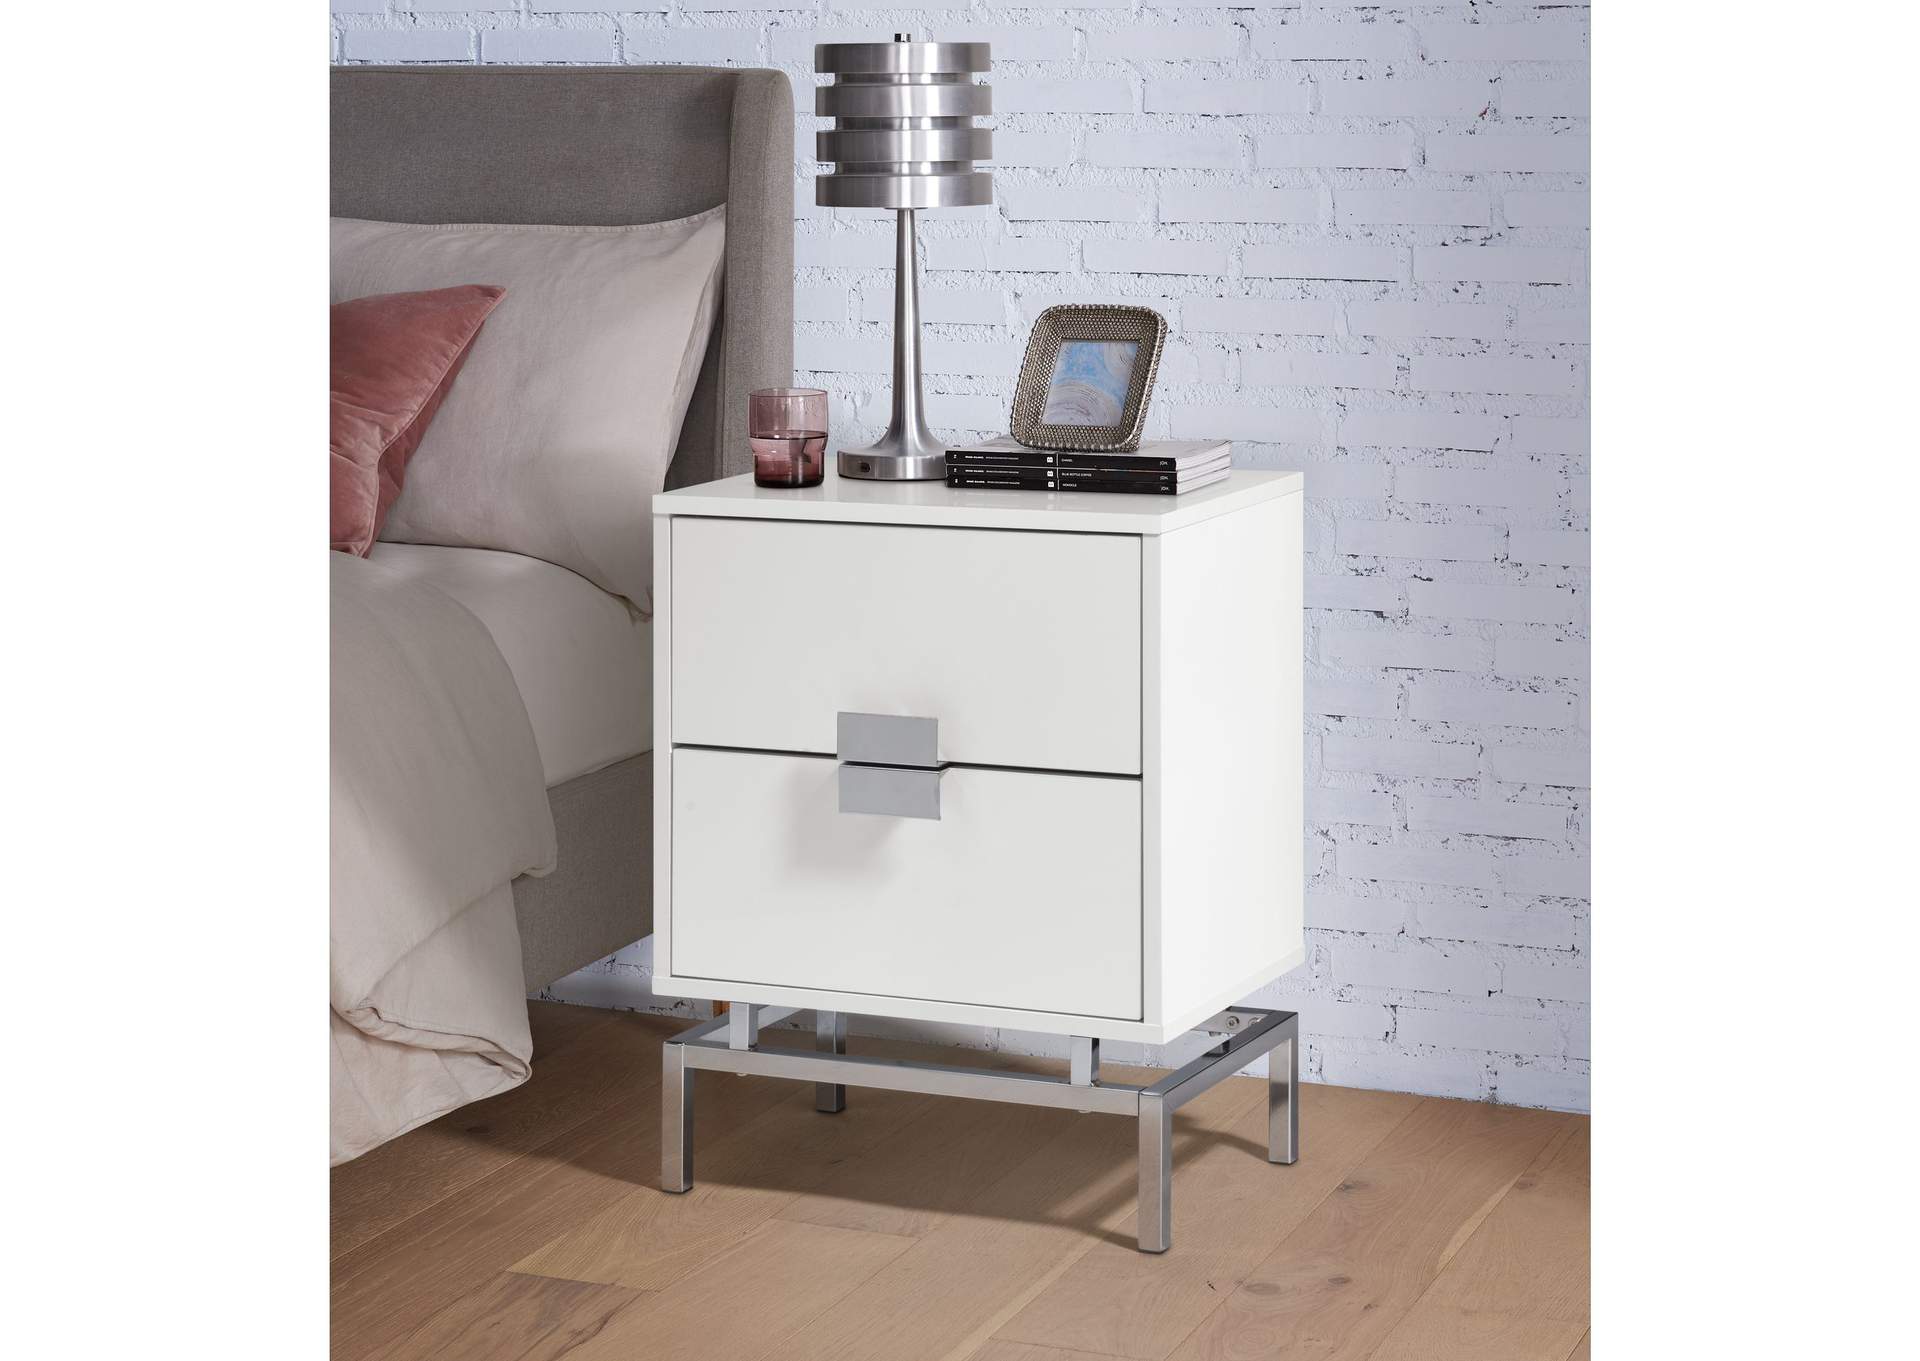 Lola Accent Nightstand With White Top In Chrome,Elements